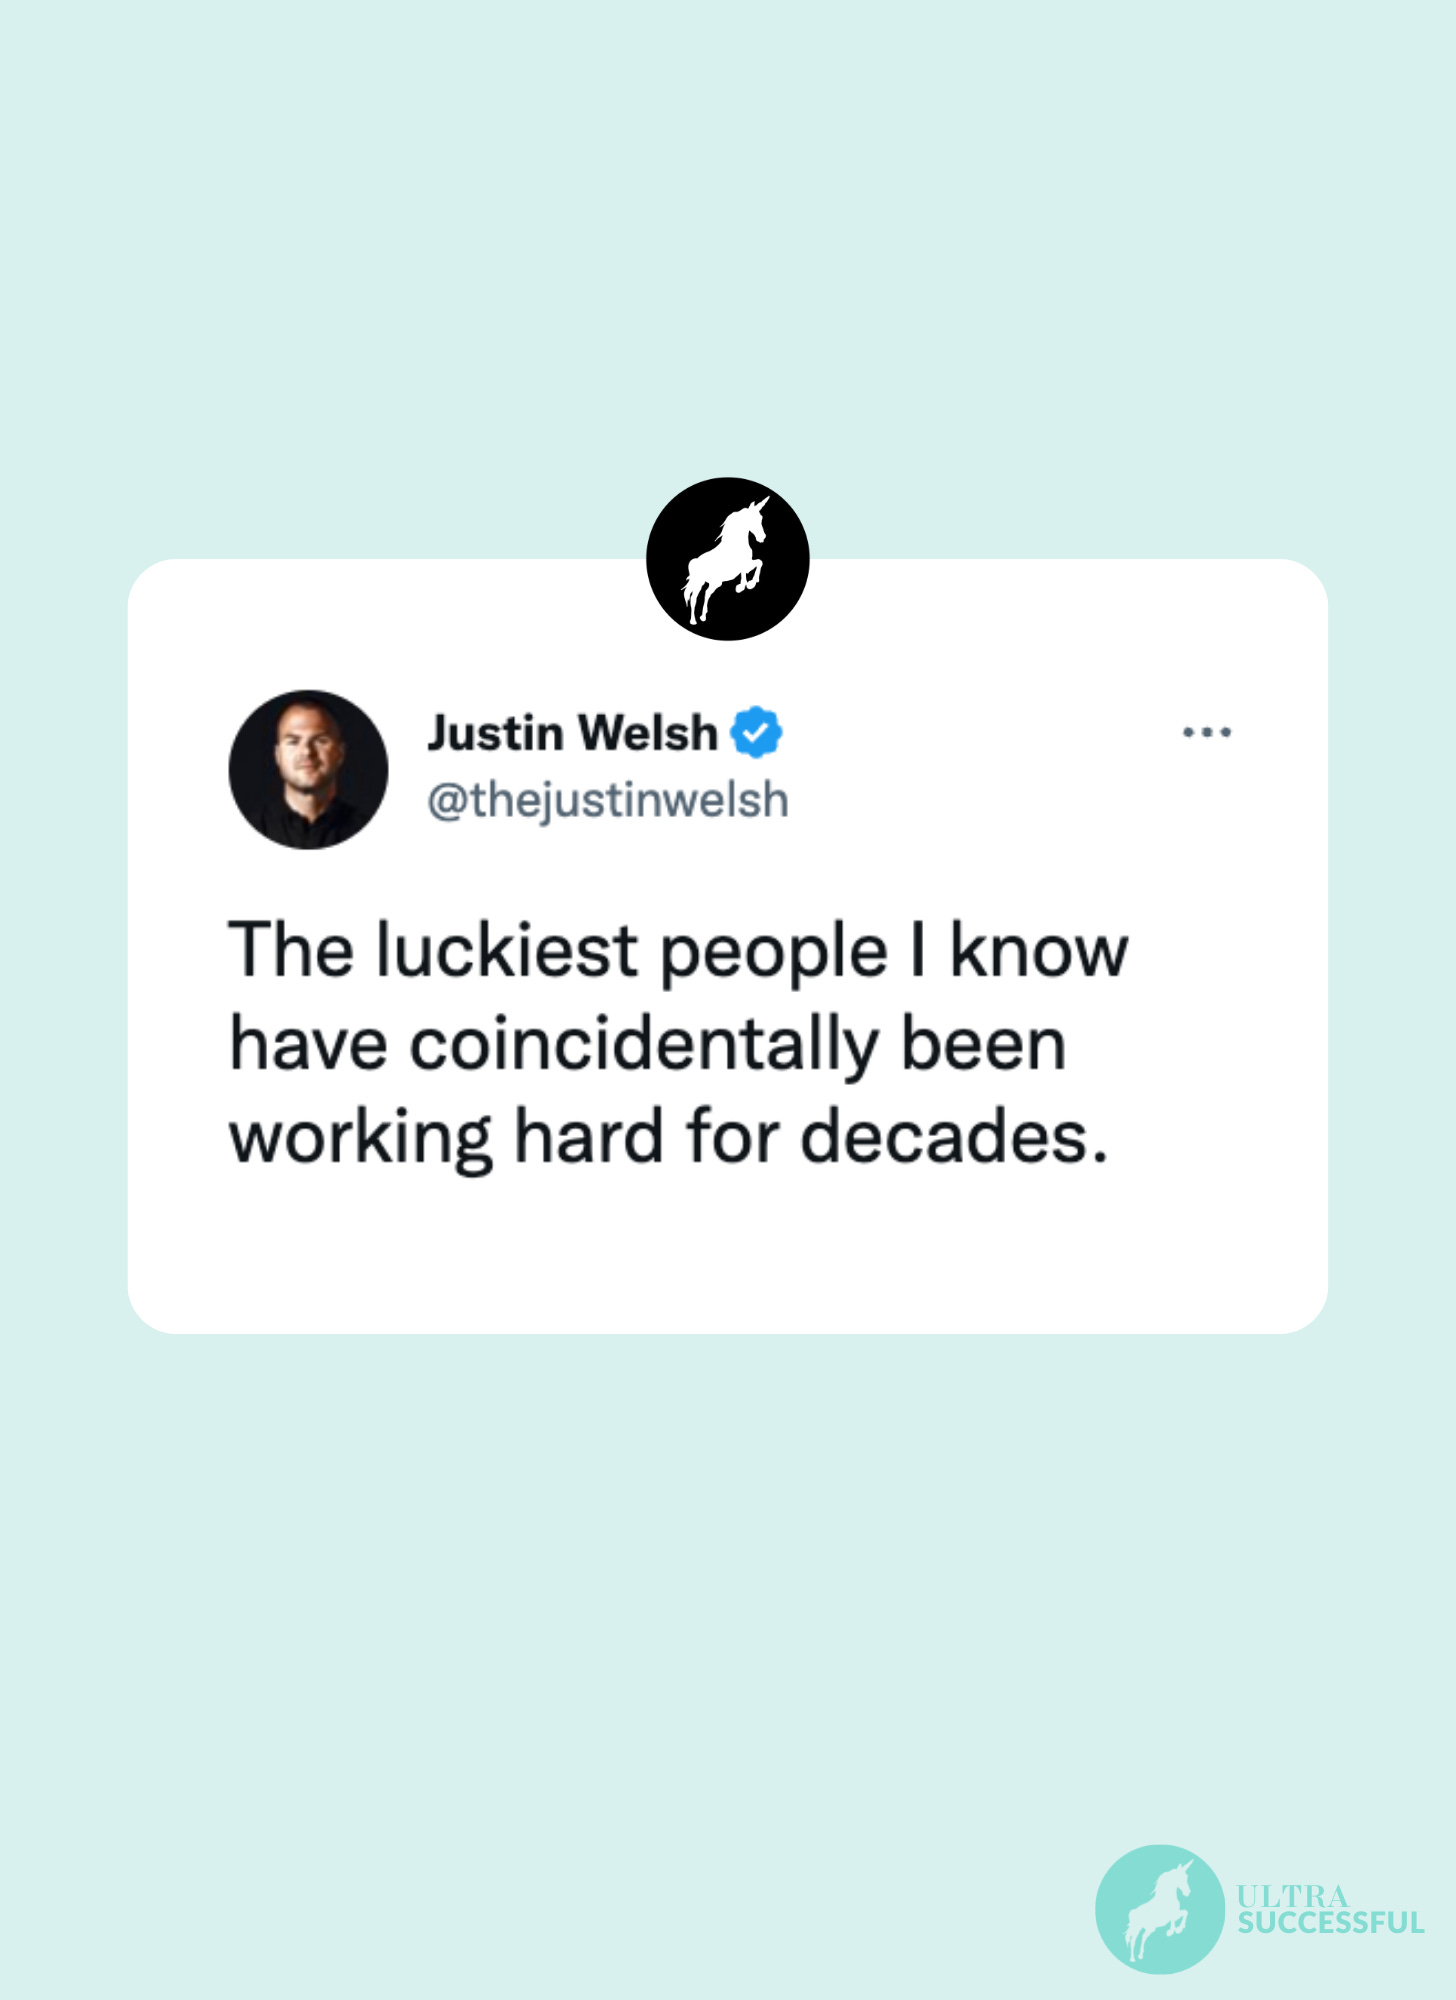 @thejustinwelsh: The luckiest people I know have coincidentally been working hard for decades.